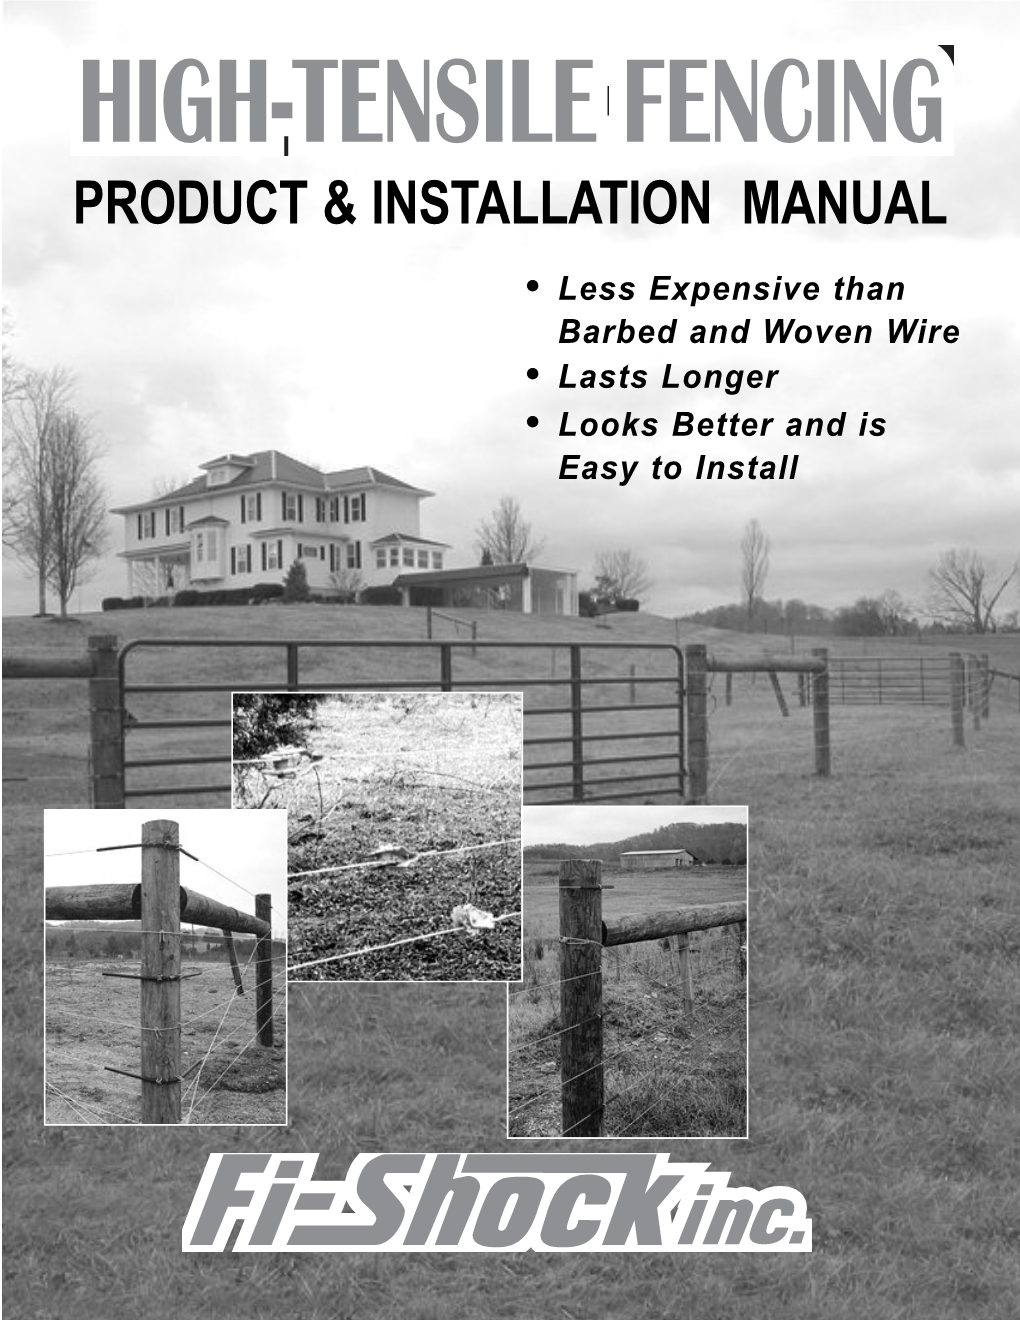 Product & Installation Manual